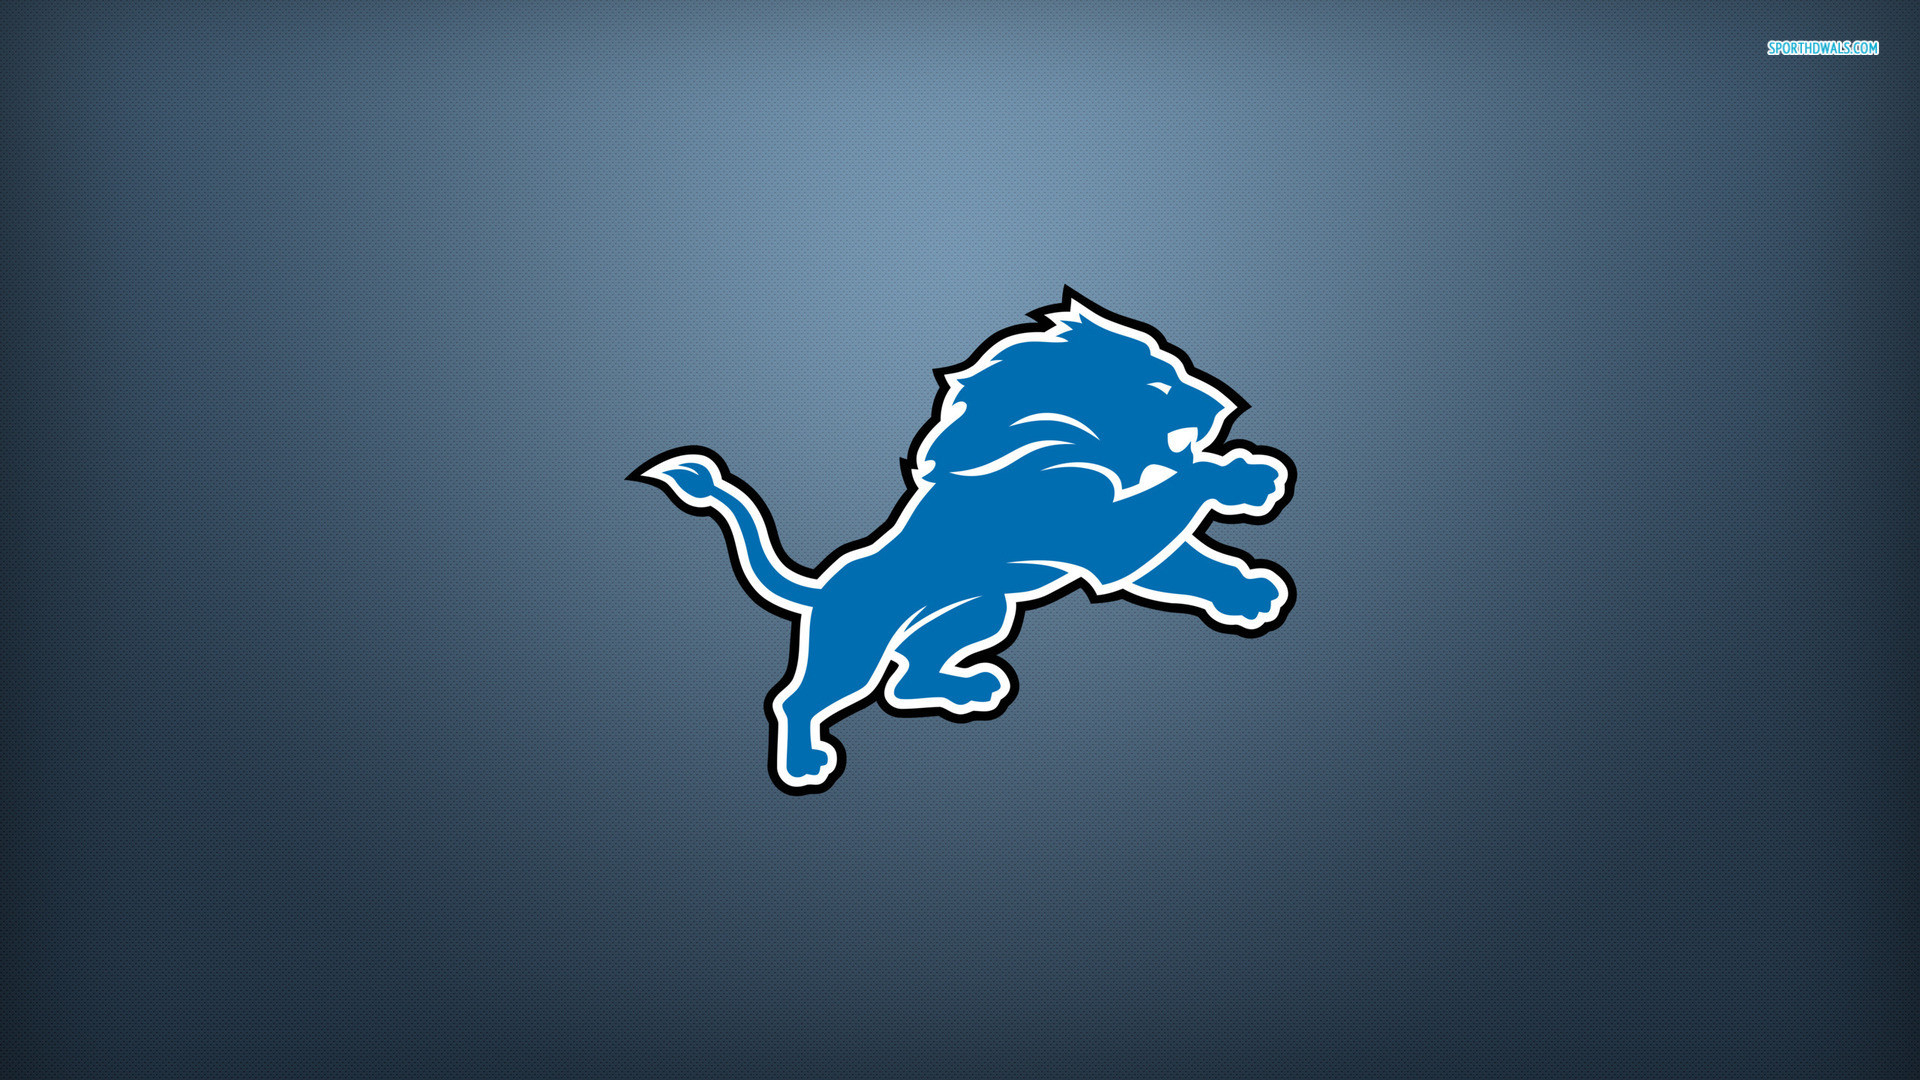 1920x1080 Download free detroit lions wallpapers for your mobile phone by | HD  Wallpapers | Pinterest | Detroit lions wallpaper